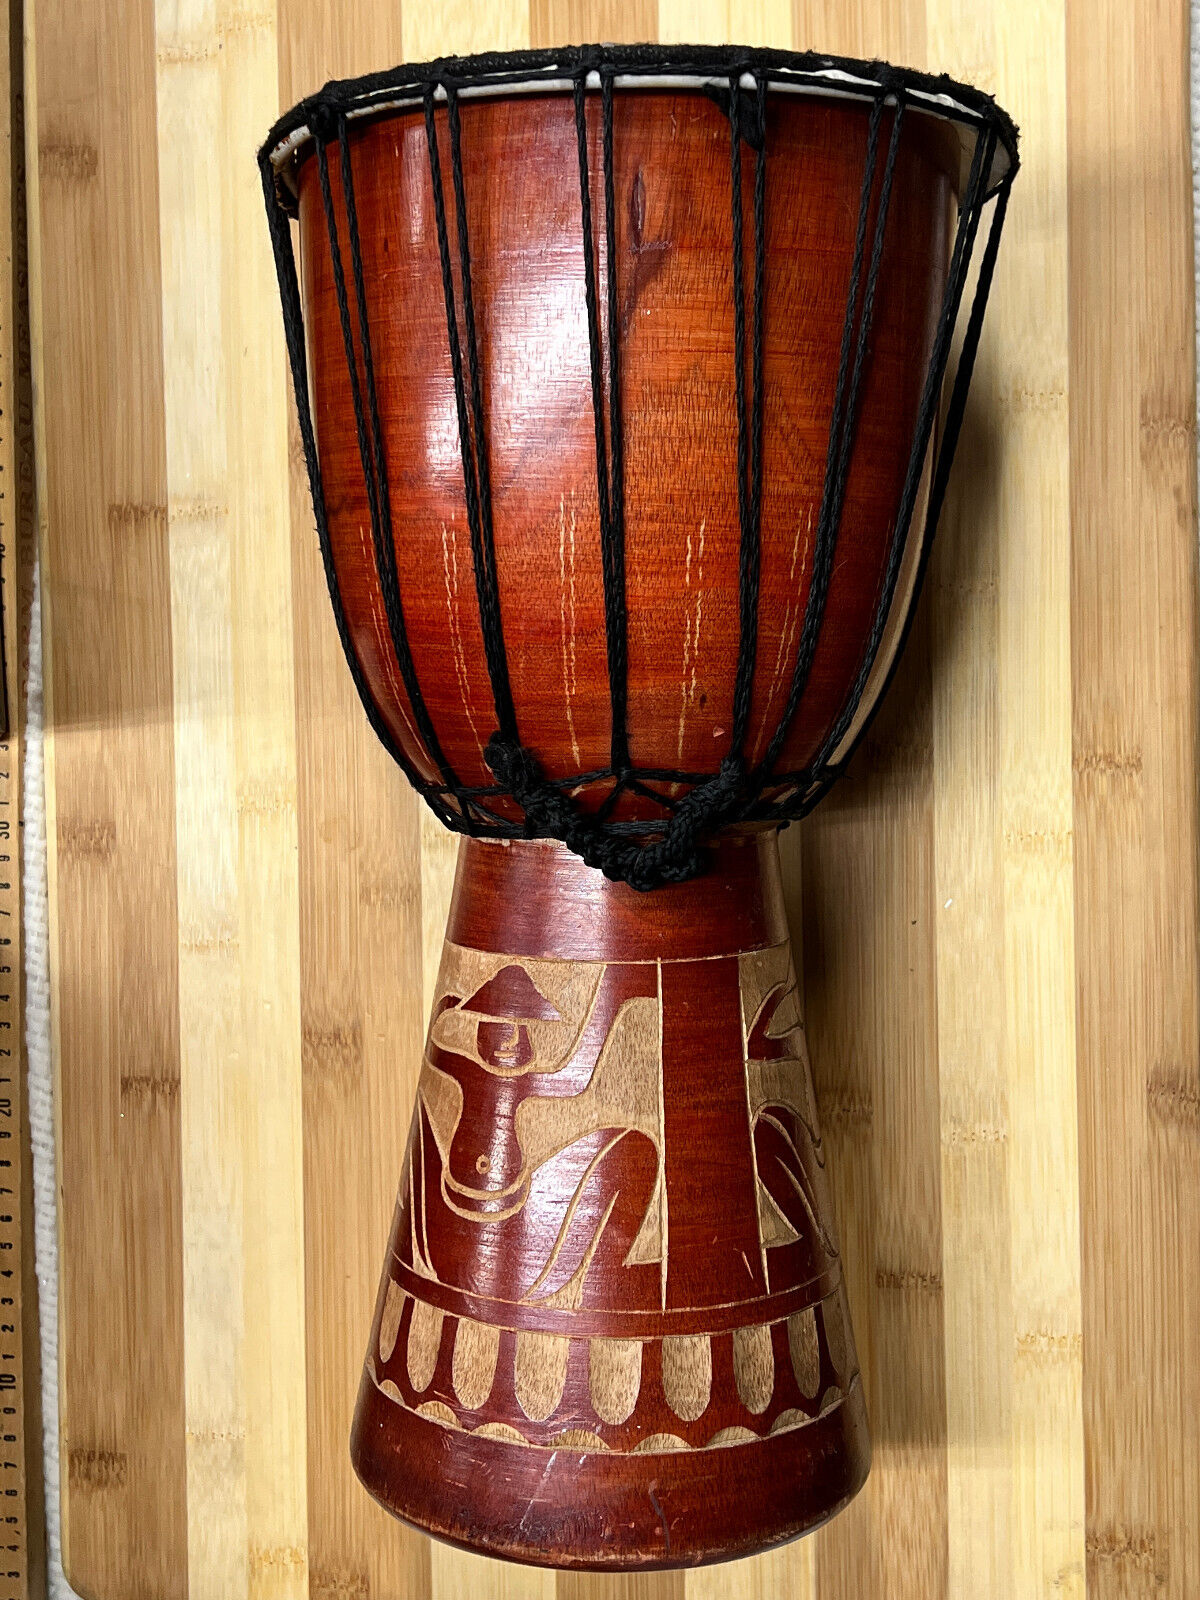 Indonesian Hand Carved Djembe Wood Red Drum Bongo 16 Inches Tall 8" Head African